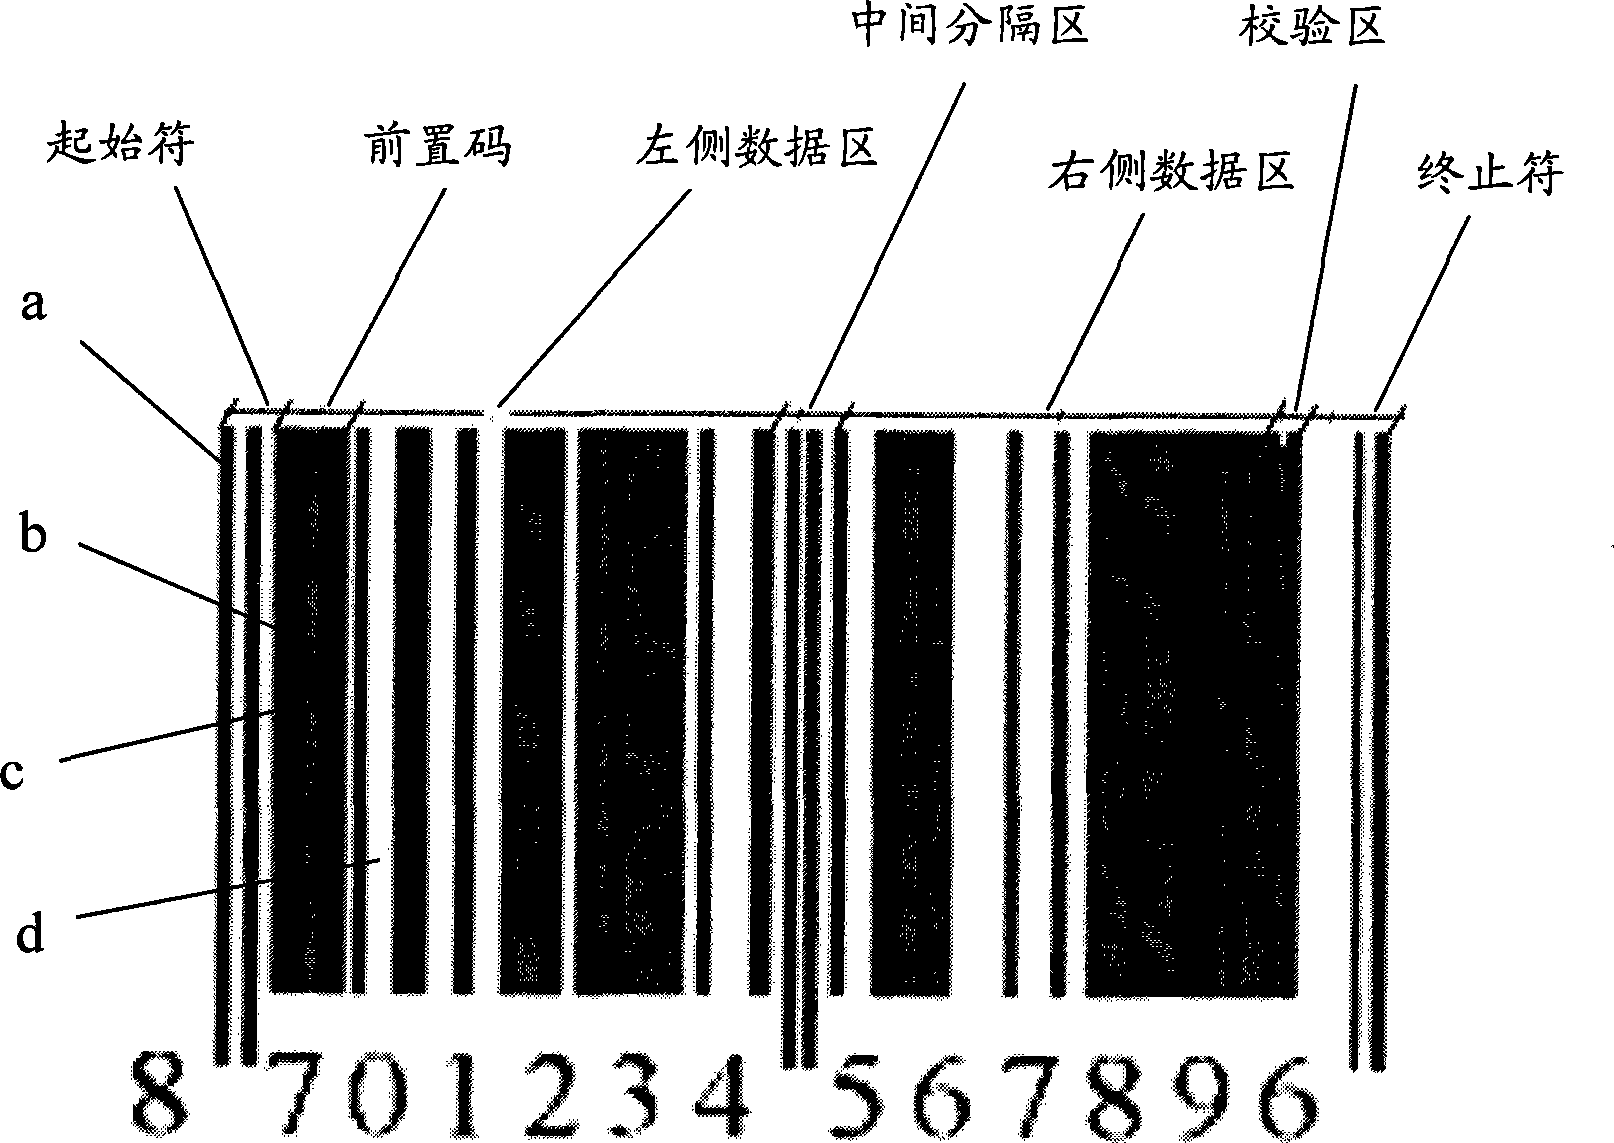 Colourful commercial articles bar code and method for setting commercial articles information using the same